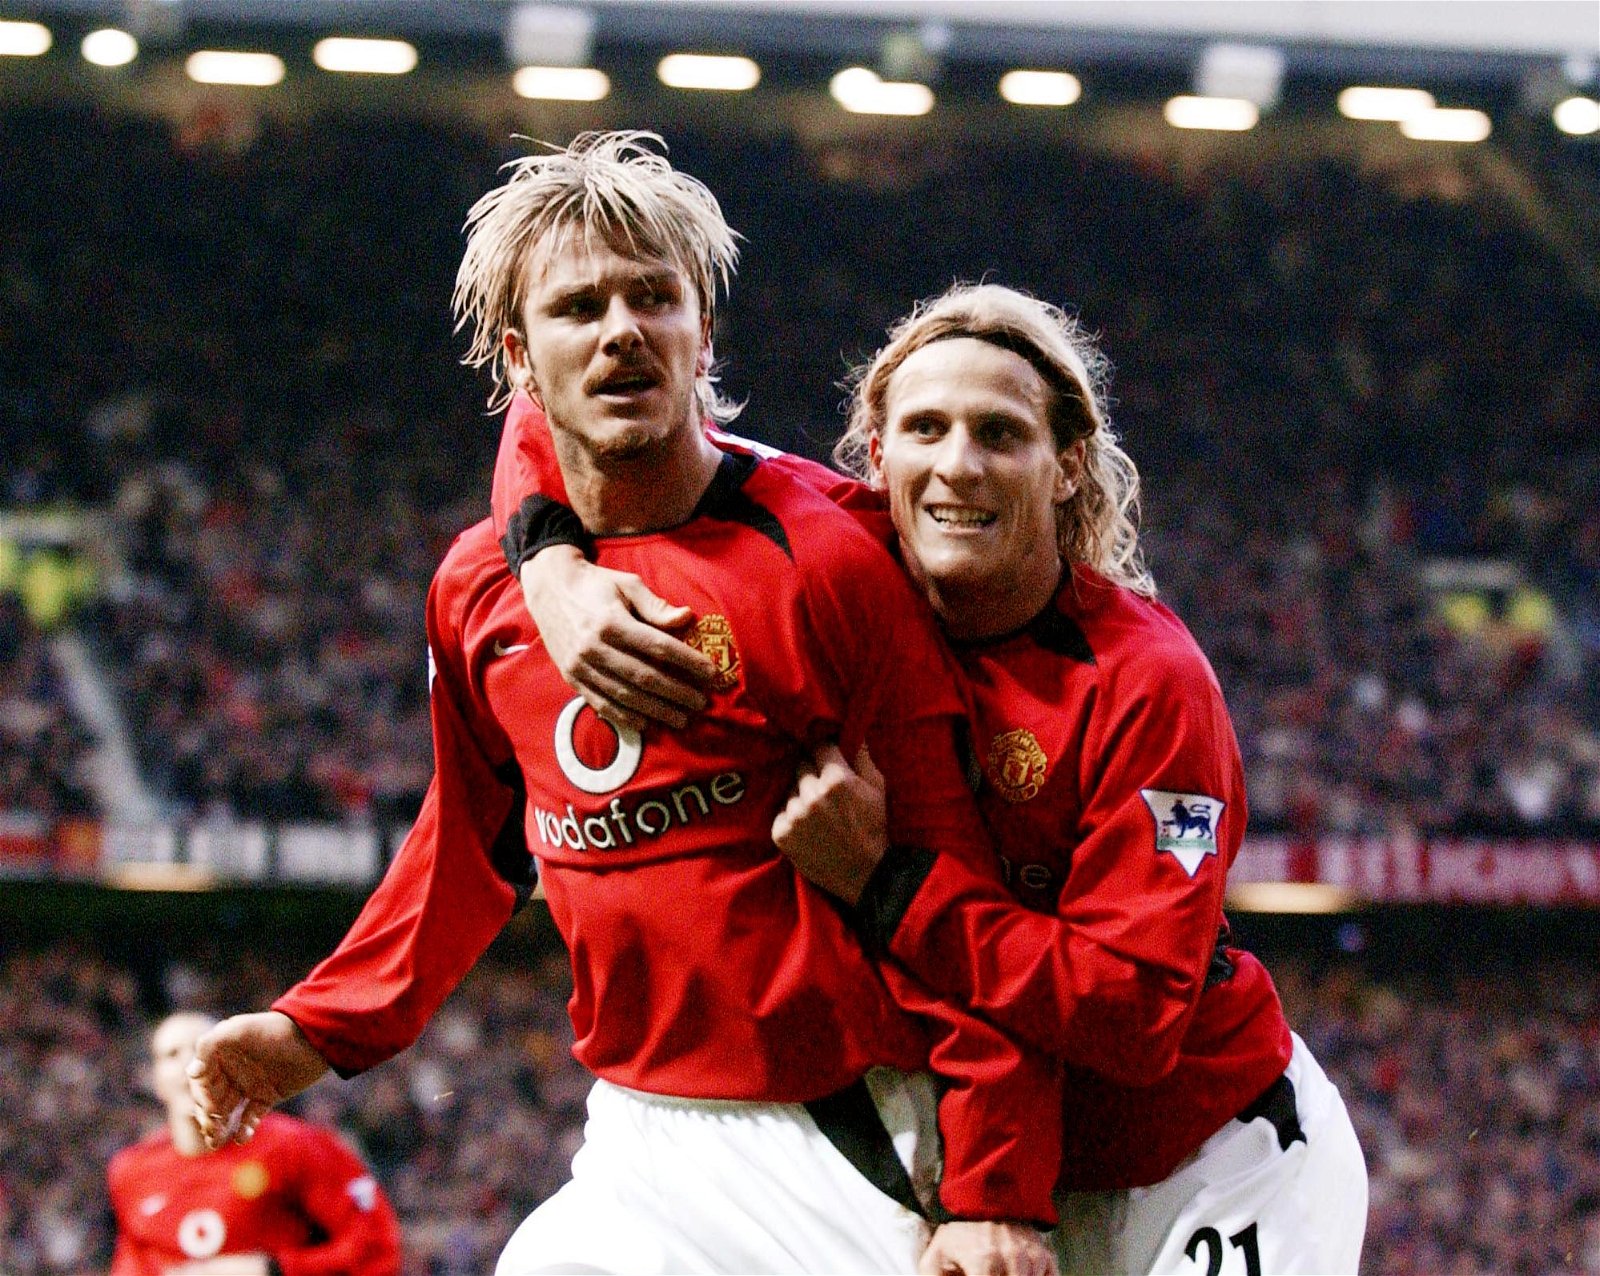 Players That Never Made It At Manchester United